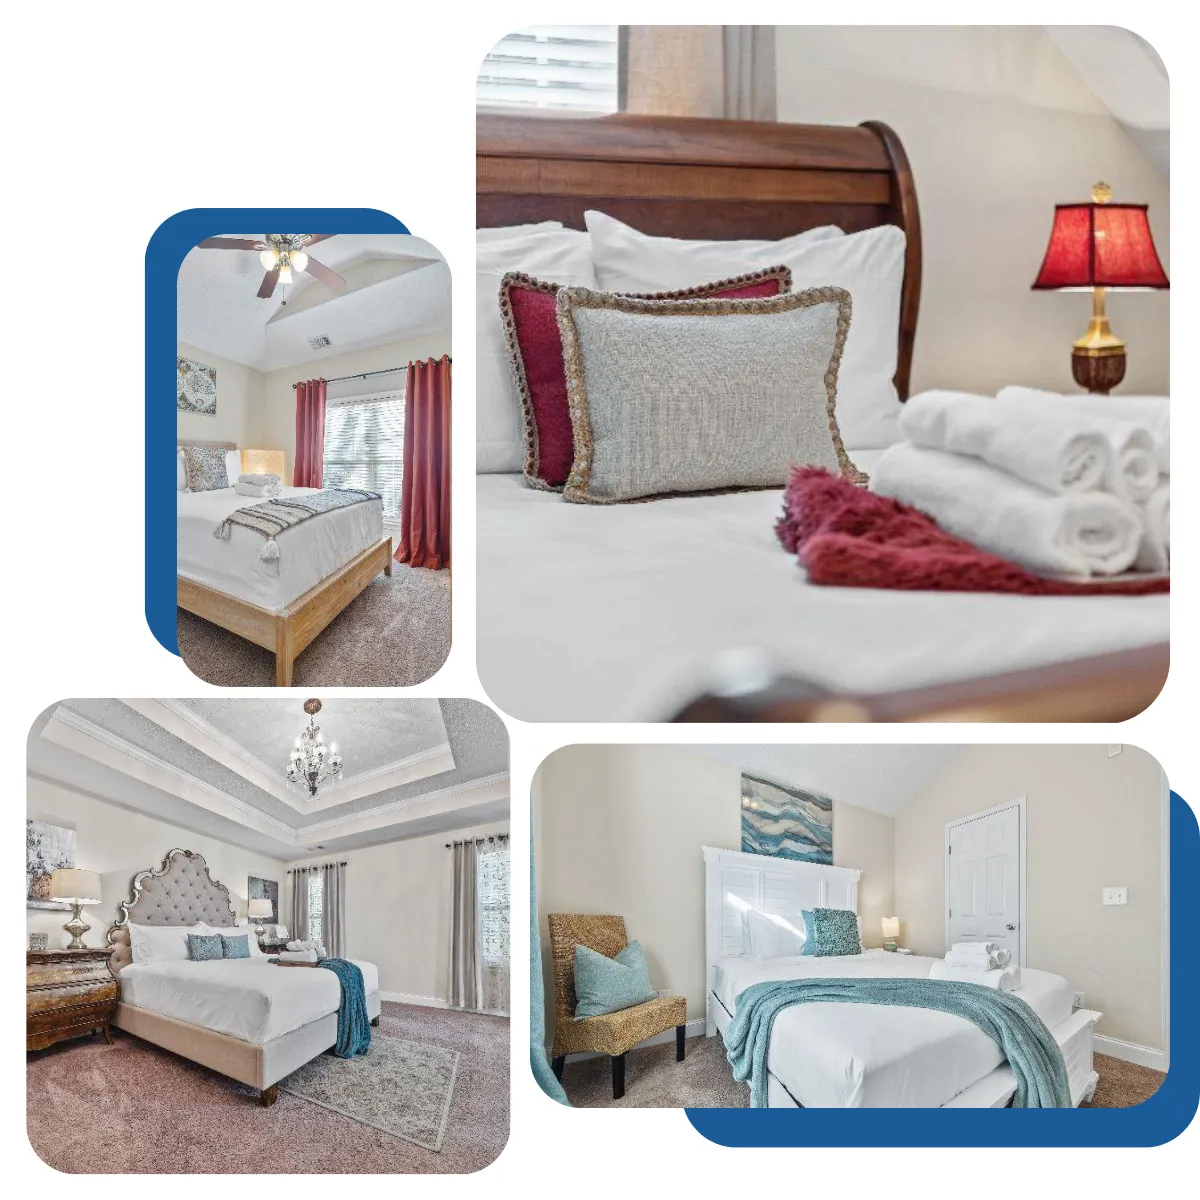 The Serenity Retreat - Sleep on a sofa bed in the living room and a king bed in the bedroom.